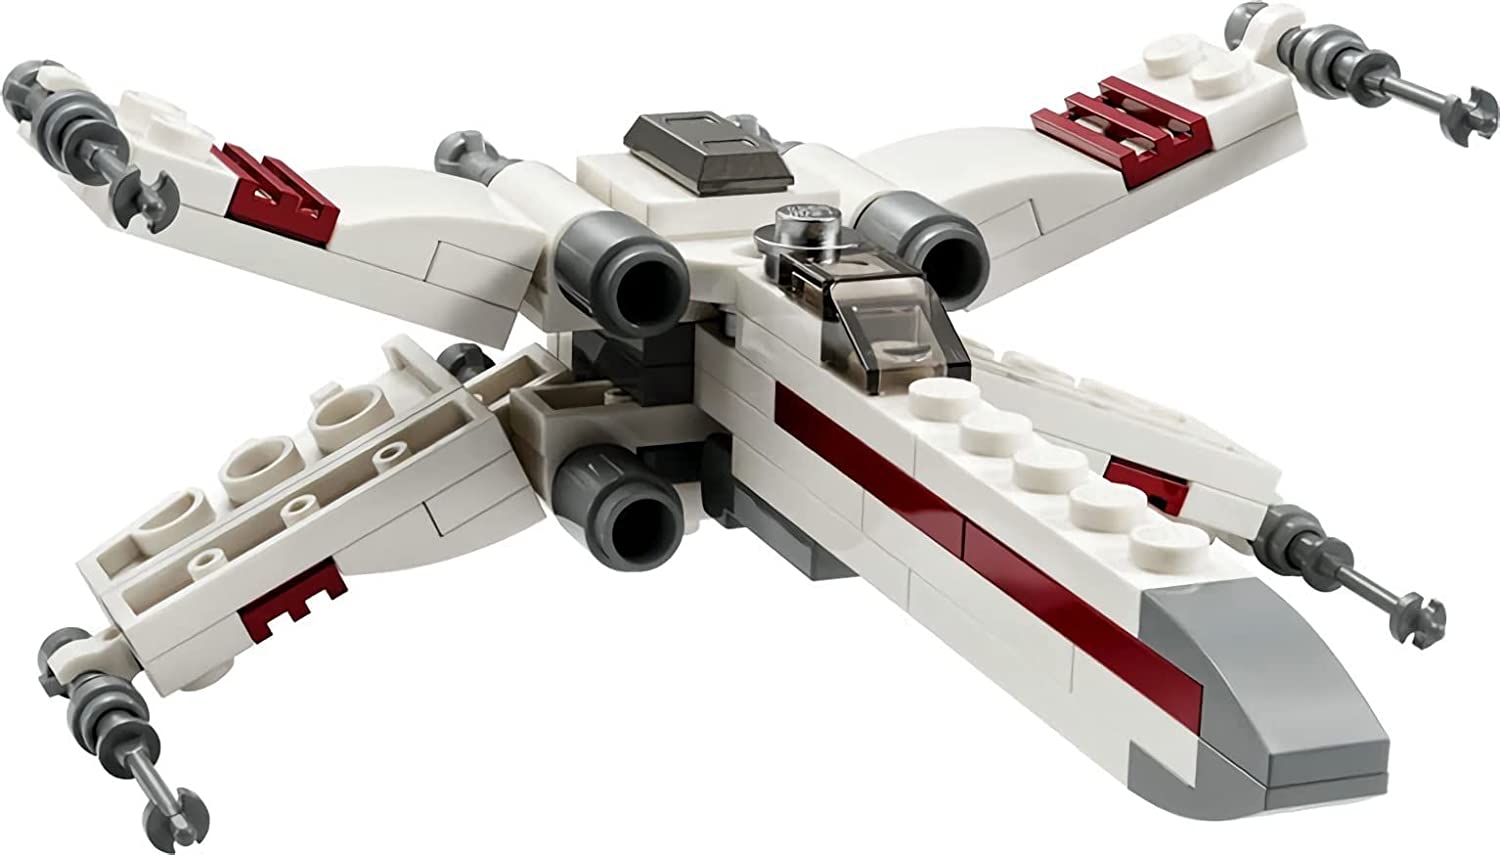 X-Wing Starfighter — Boing! Toy Shop